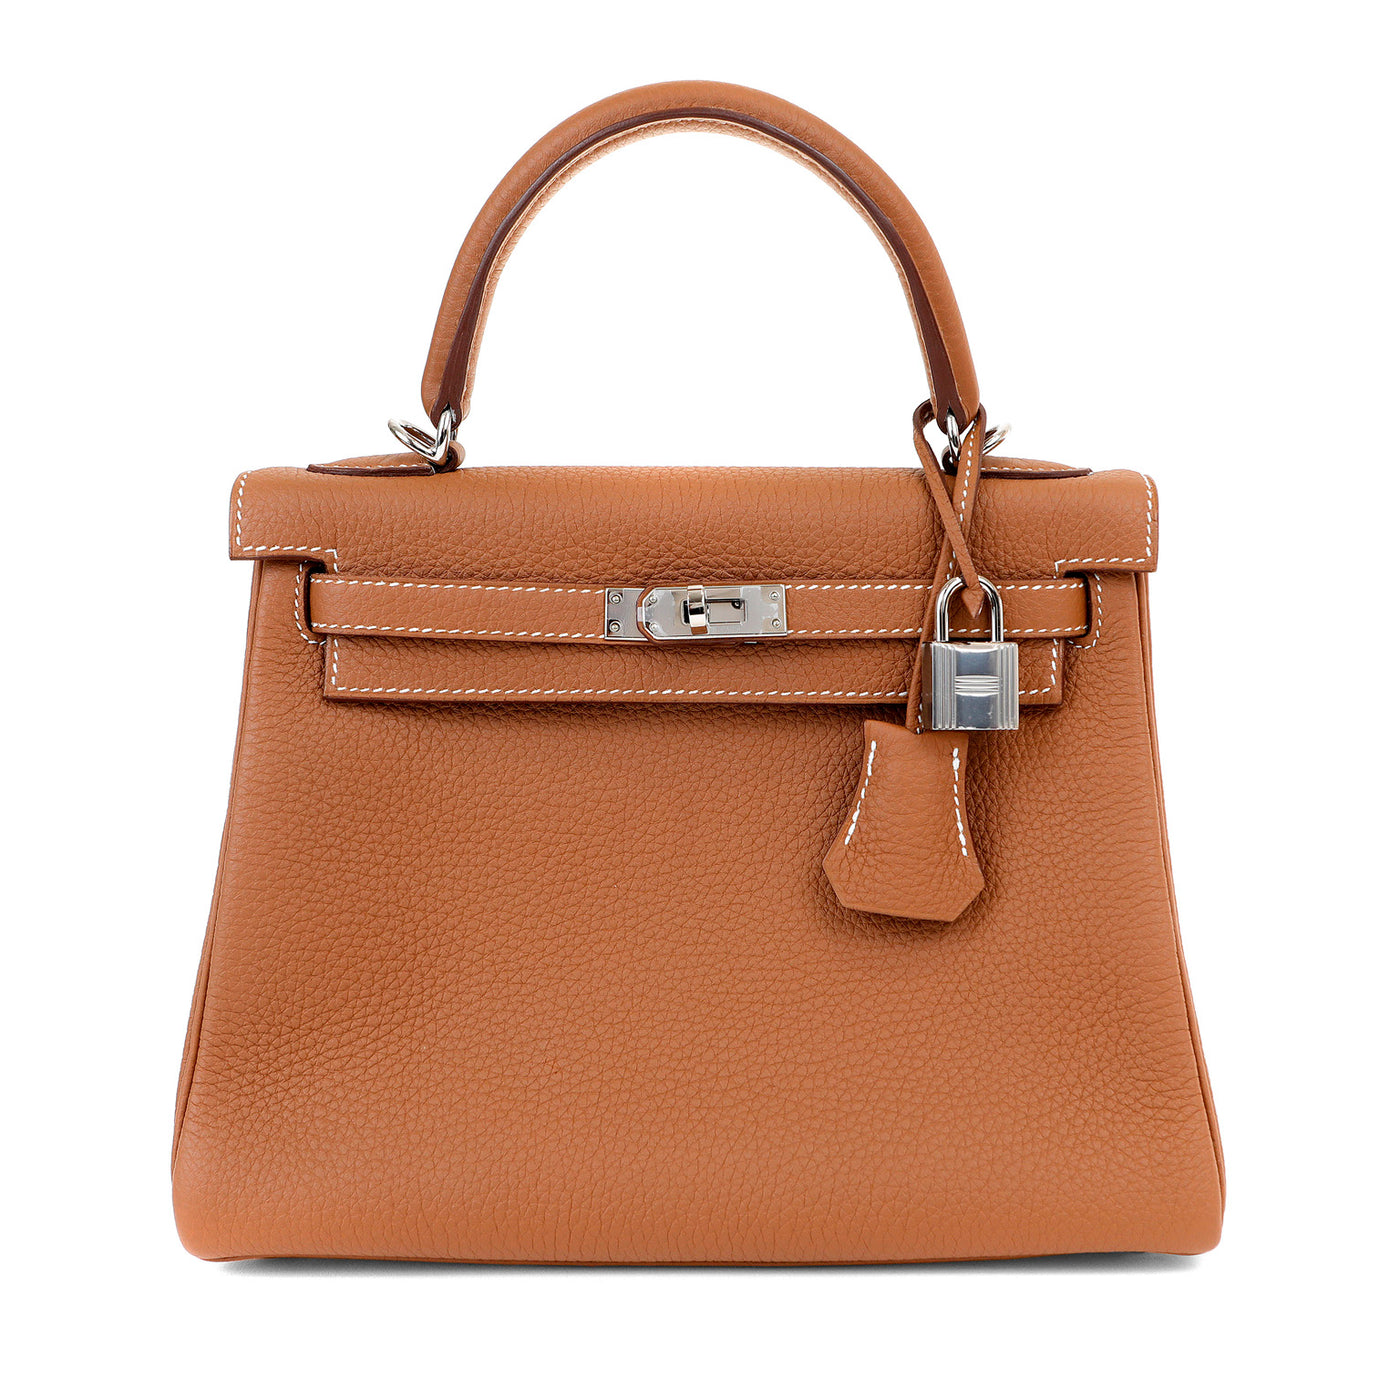 Add a touch of luxury to your accessory collection with this stunning 25cm Gold Togo Kelly handbag by Hermès